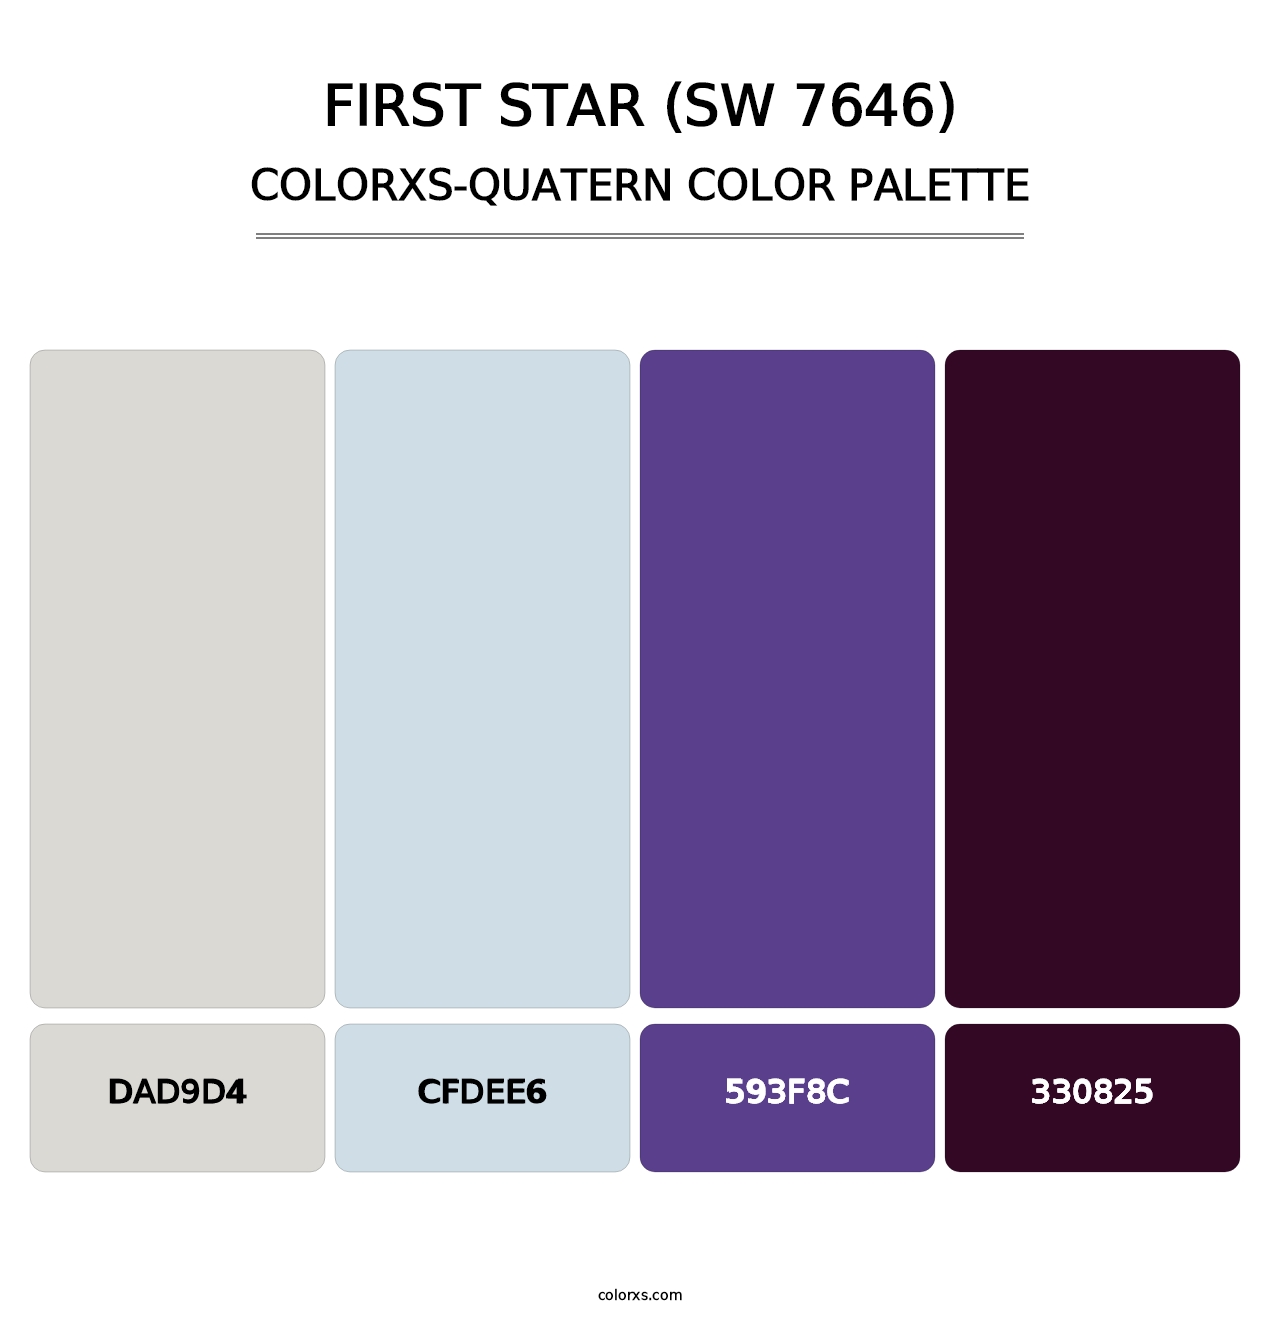 First Star (SW 7646) - Colorxs Quatern Palette